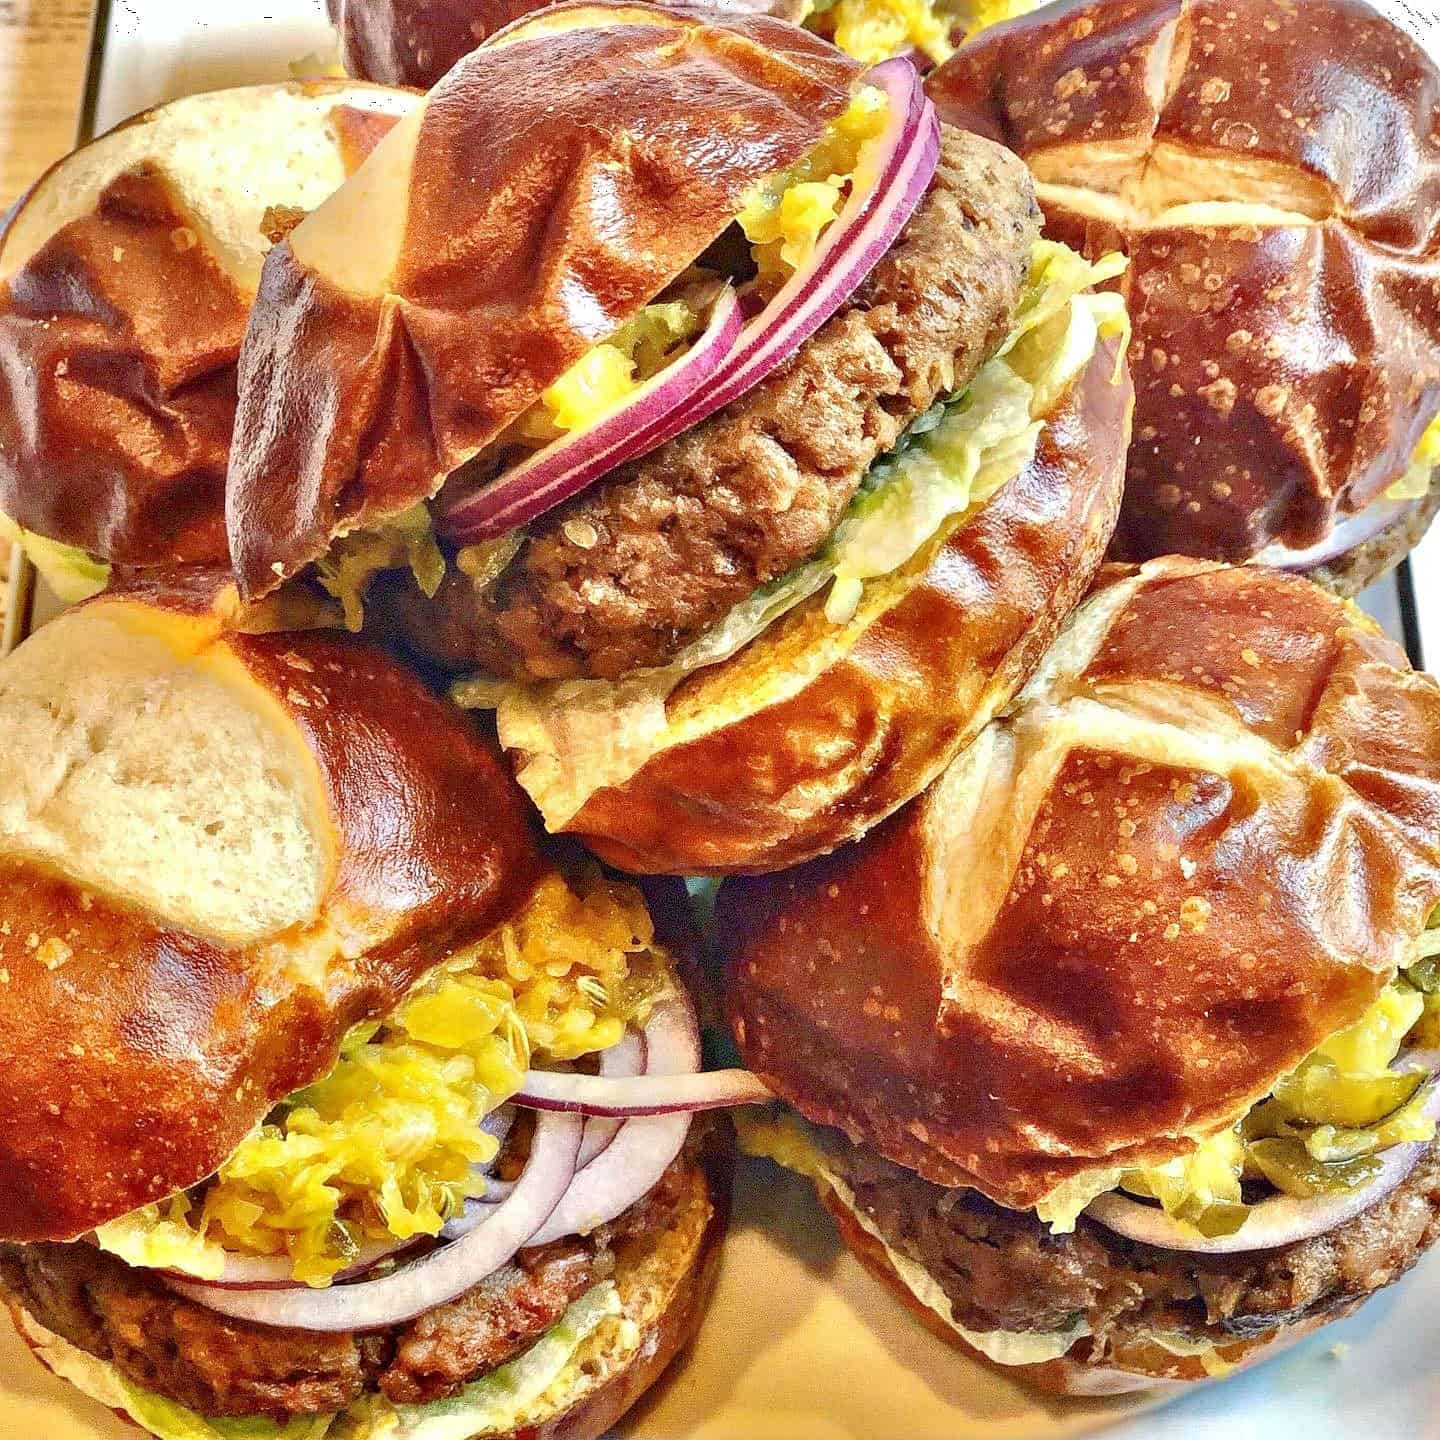 A plate of beyond sausage burgers